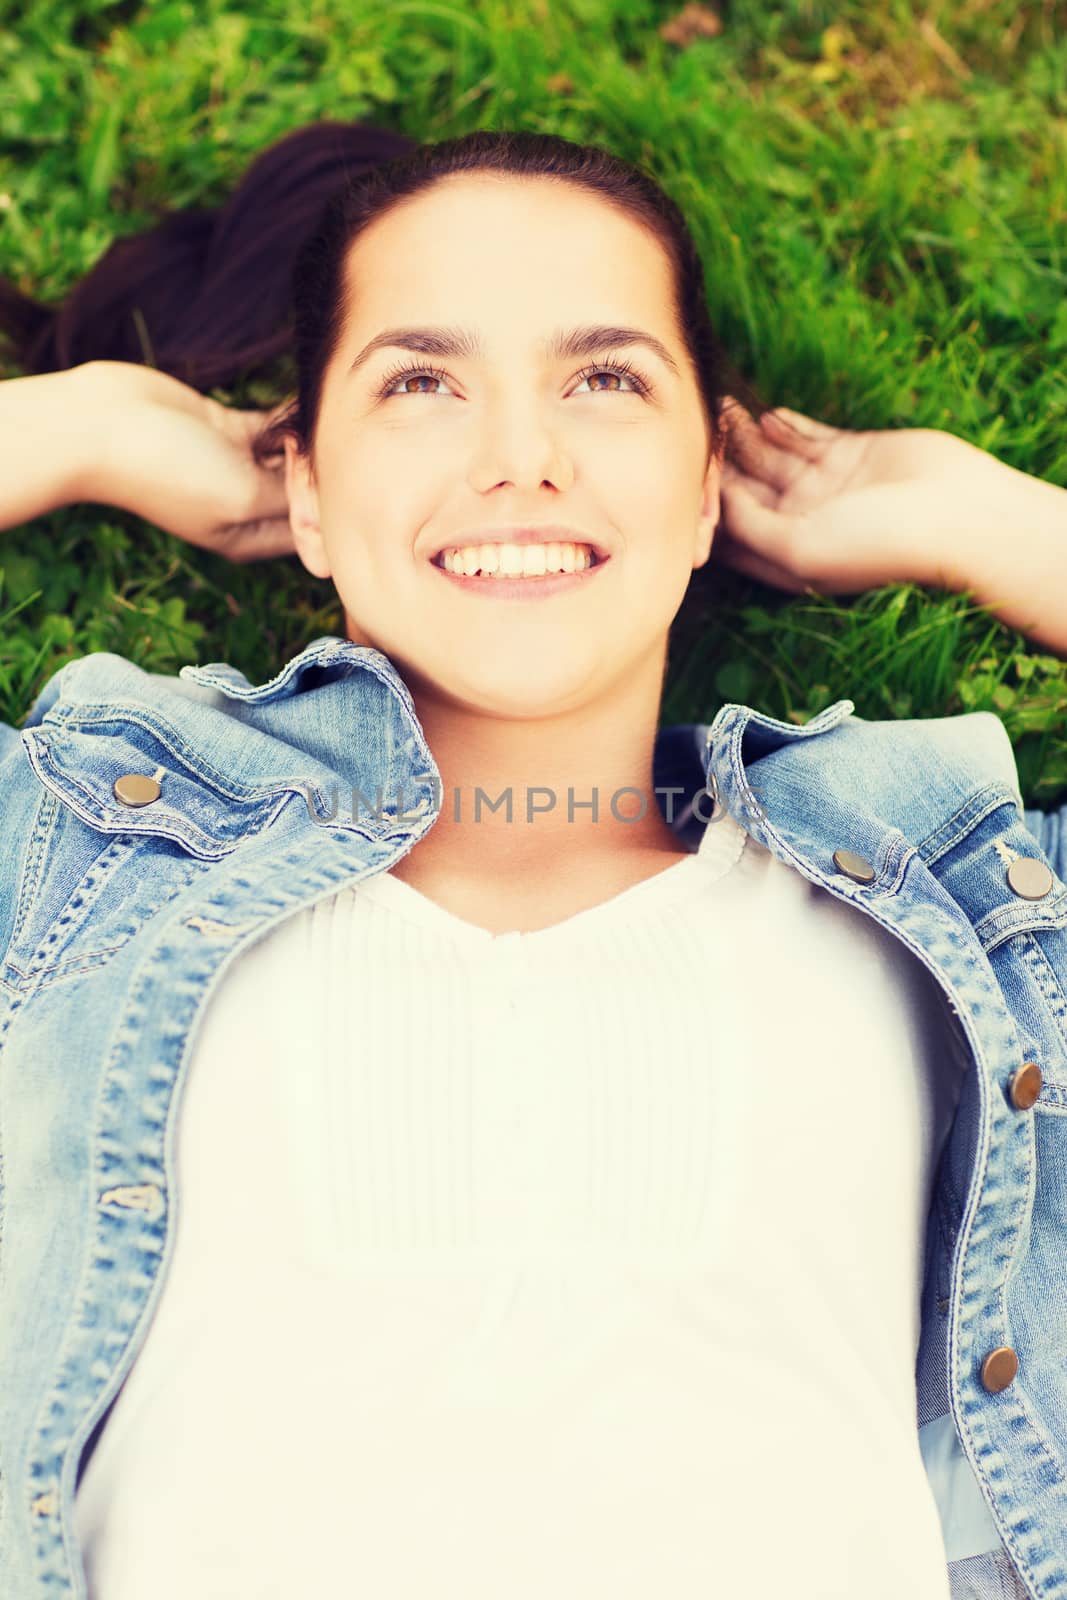 lifestyle, summer vacation, leisure and people concept - smiling young girl in blank white shirt lying on grass